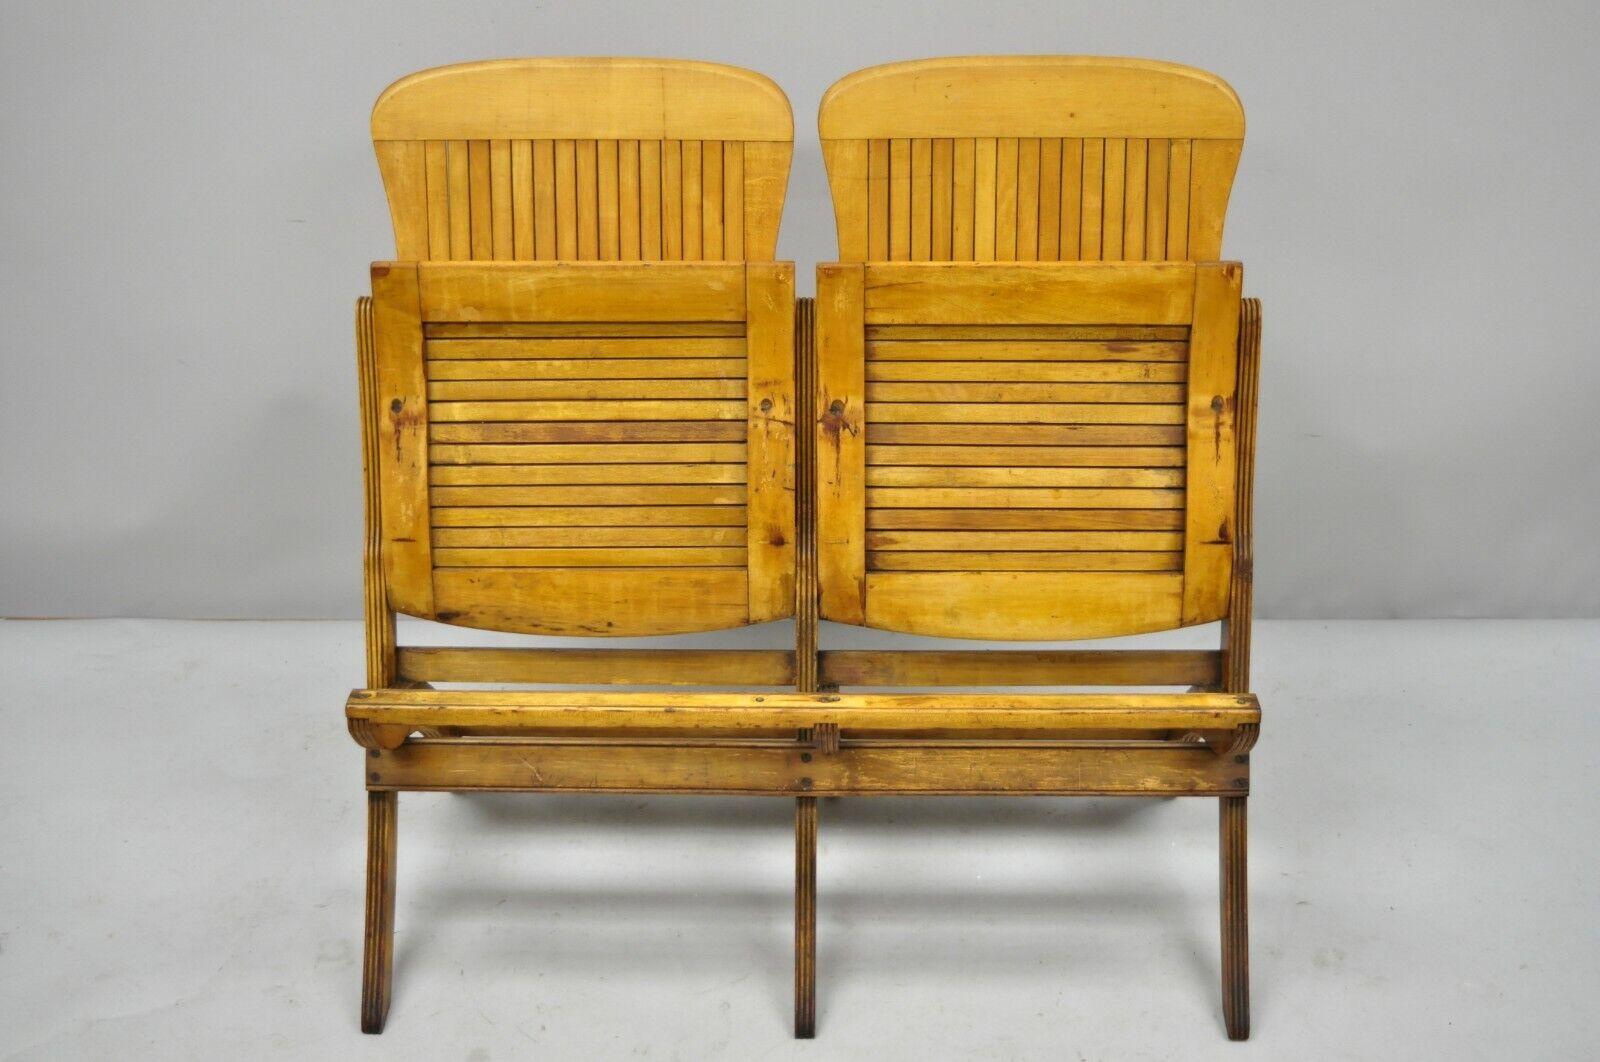 American Craftsman Antique Vintage Wood Slat Double Folding Seat Theater School Old Pew Chair For Sale